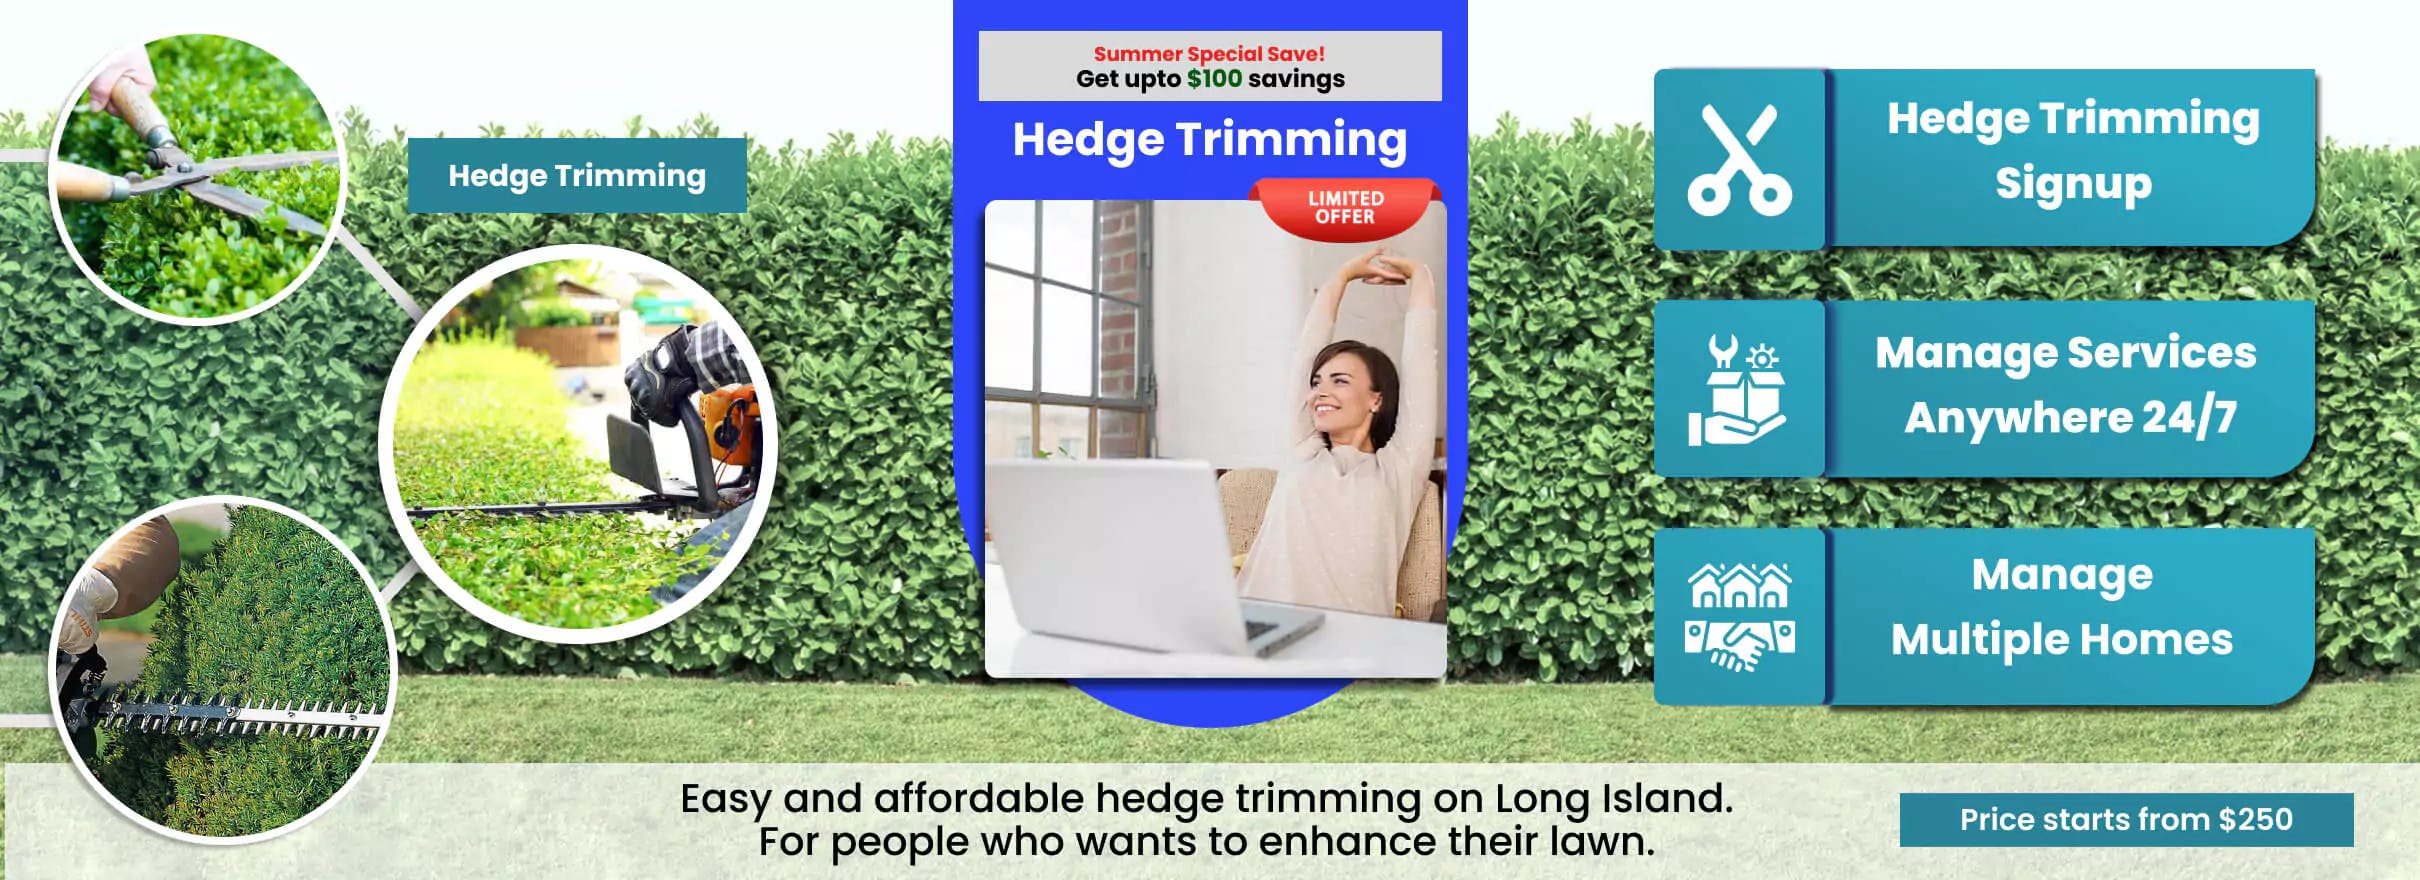 Hedge trimming background